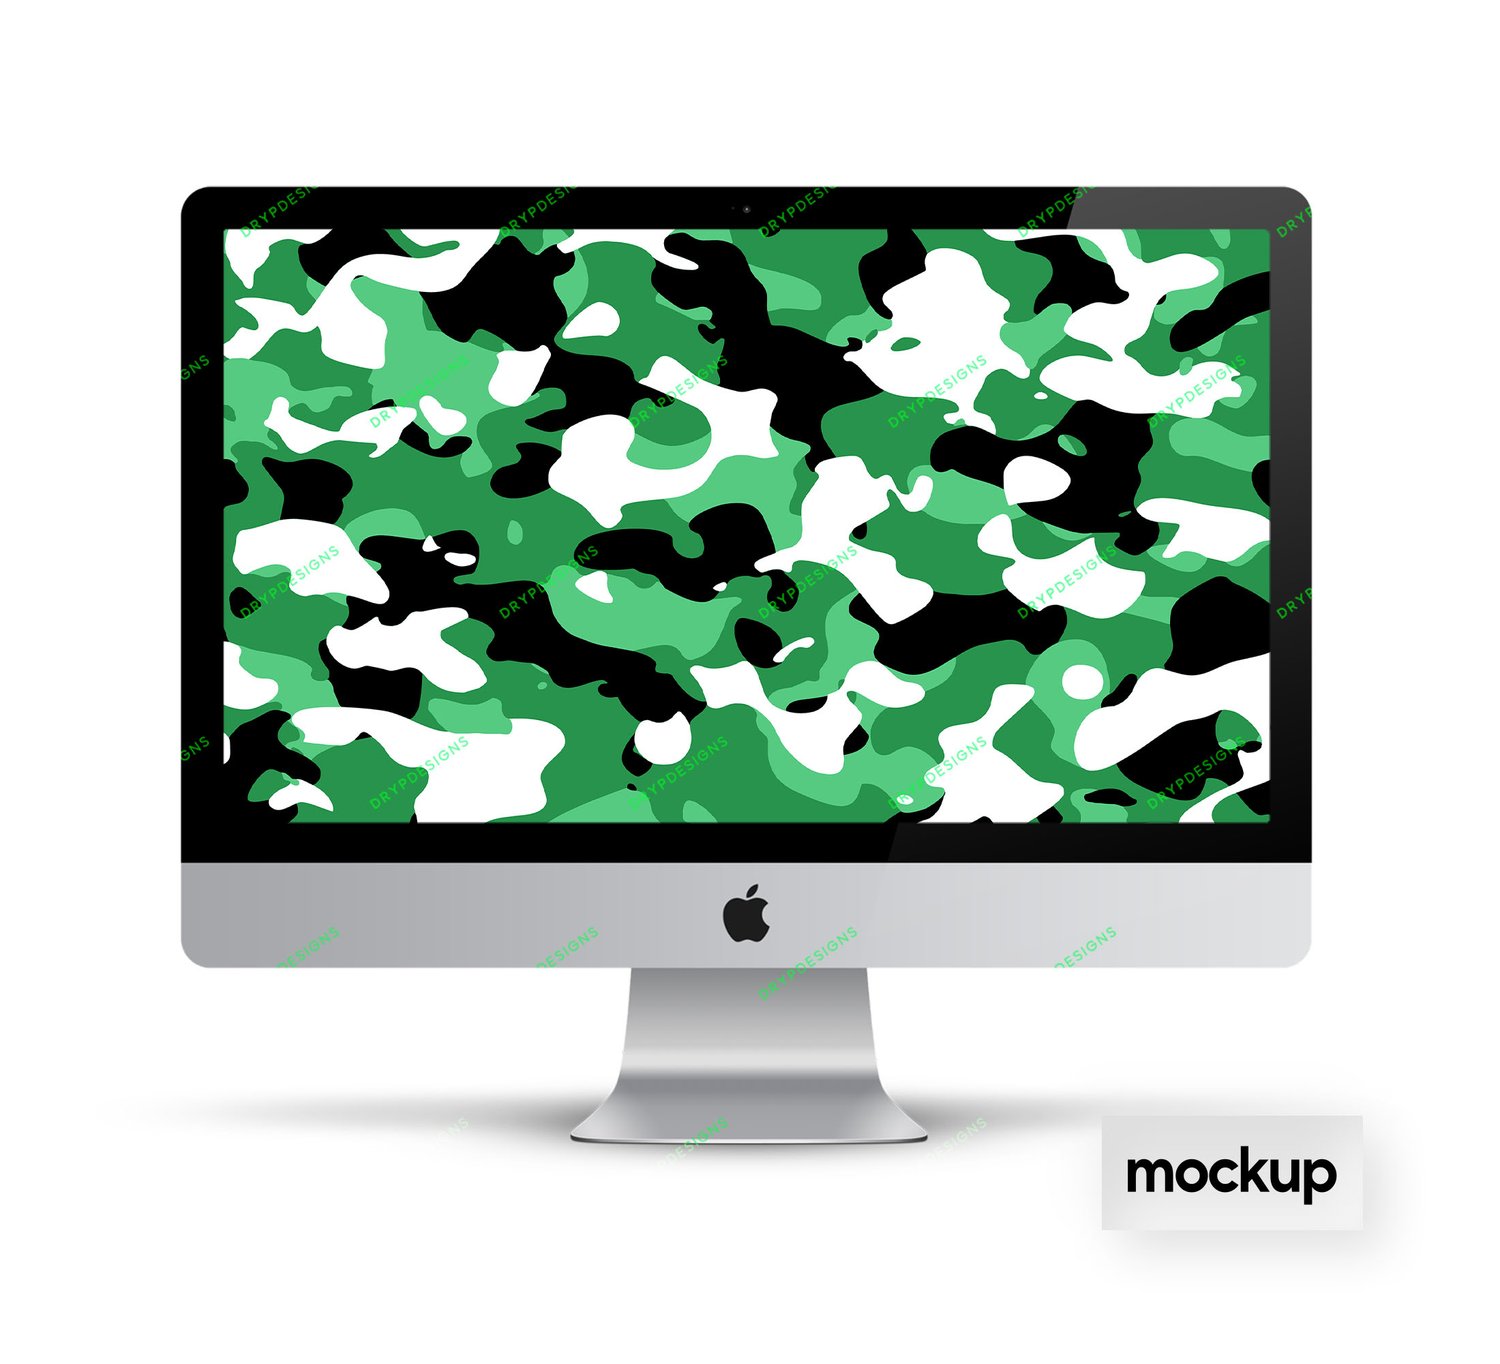 Military Green Camouflage Seamless Digital Paper Background Pattern Instant  Digital Download Files -  Canada